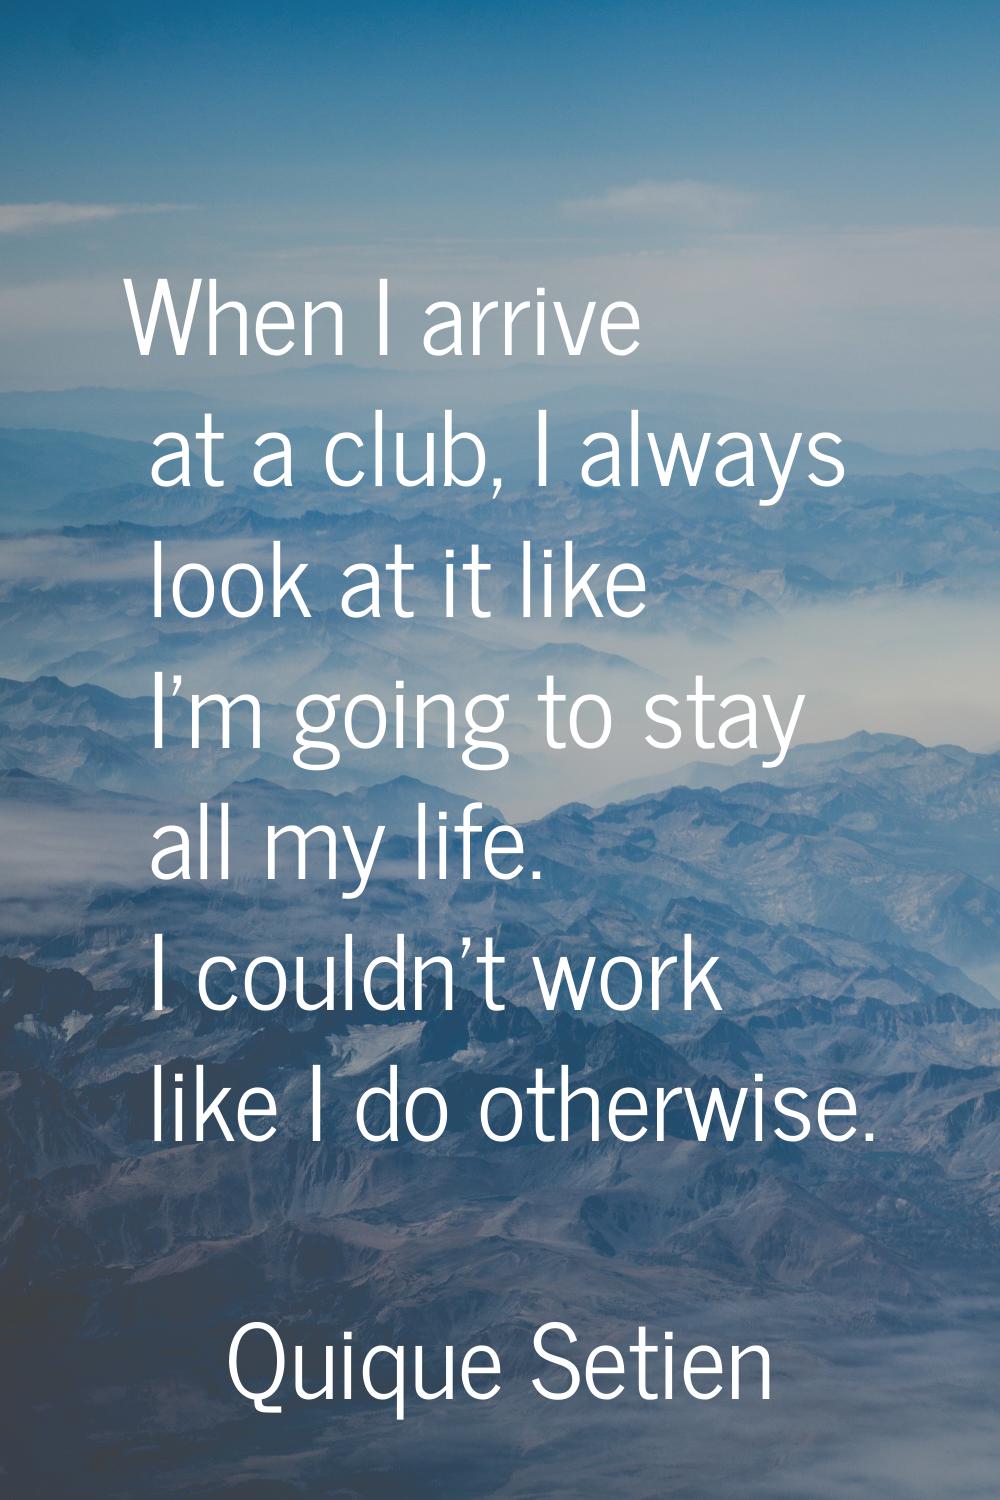 When I arrive at a club, I always look at it like I'm going to stay all my life. I couldn't work li